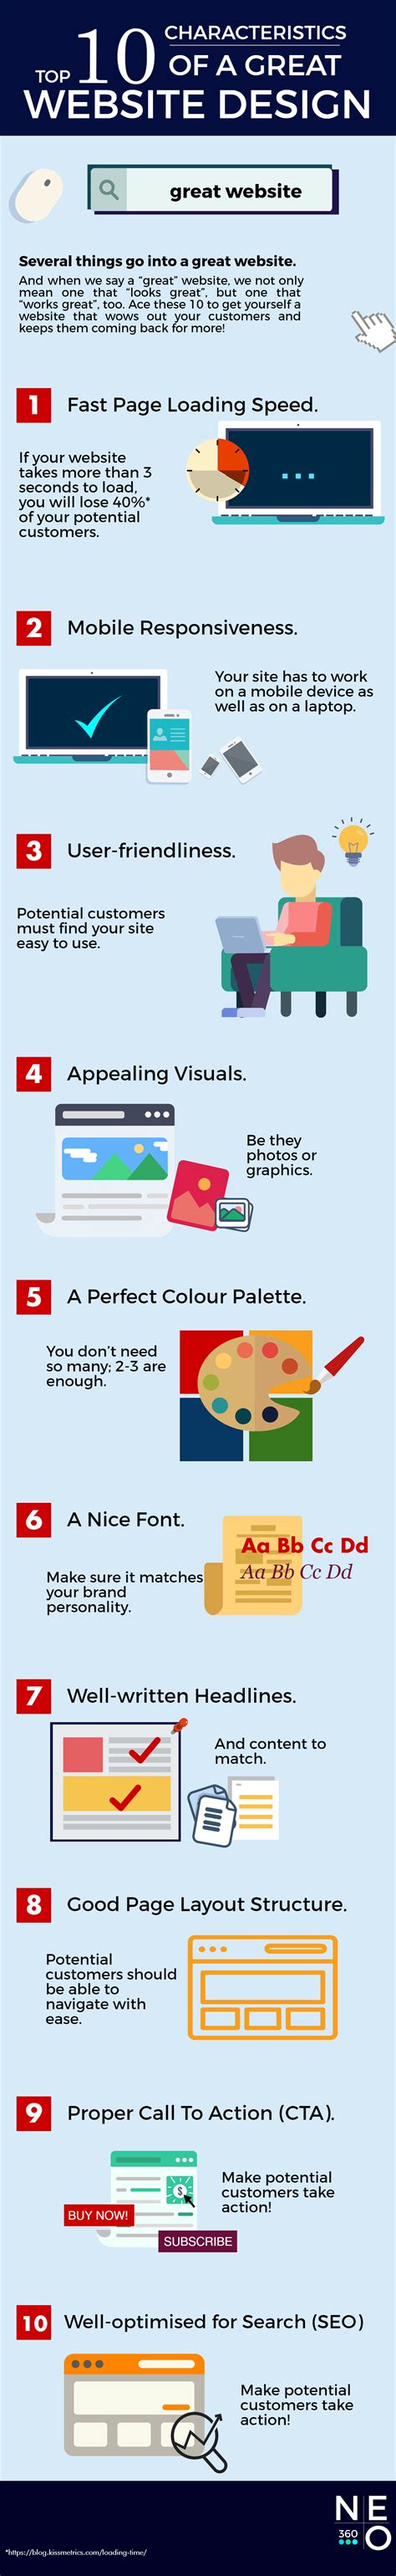 Top 10 Characteristics Of A Great Website Design Infographic